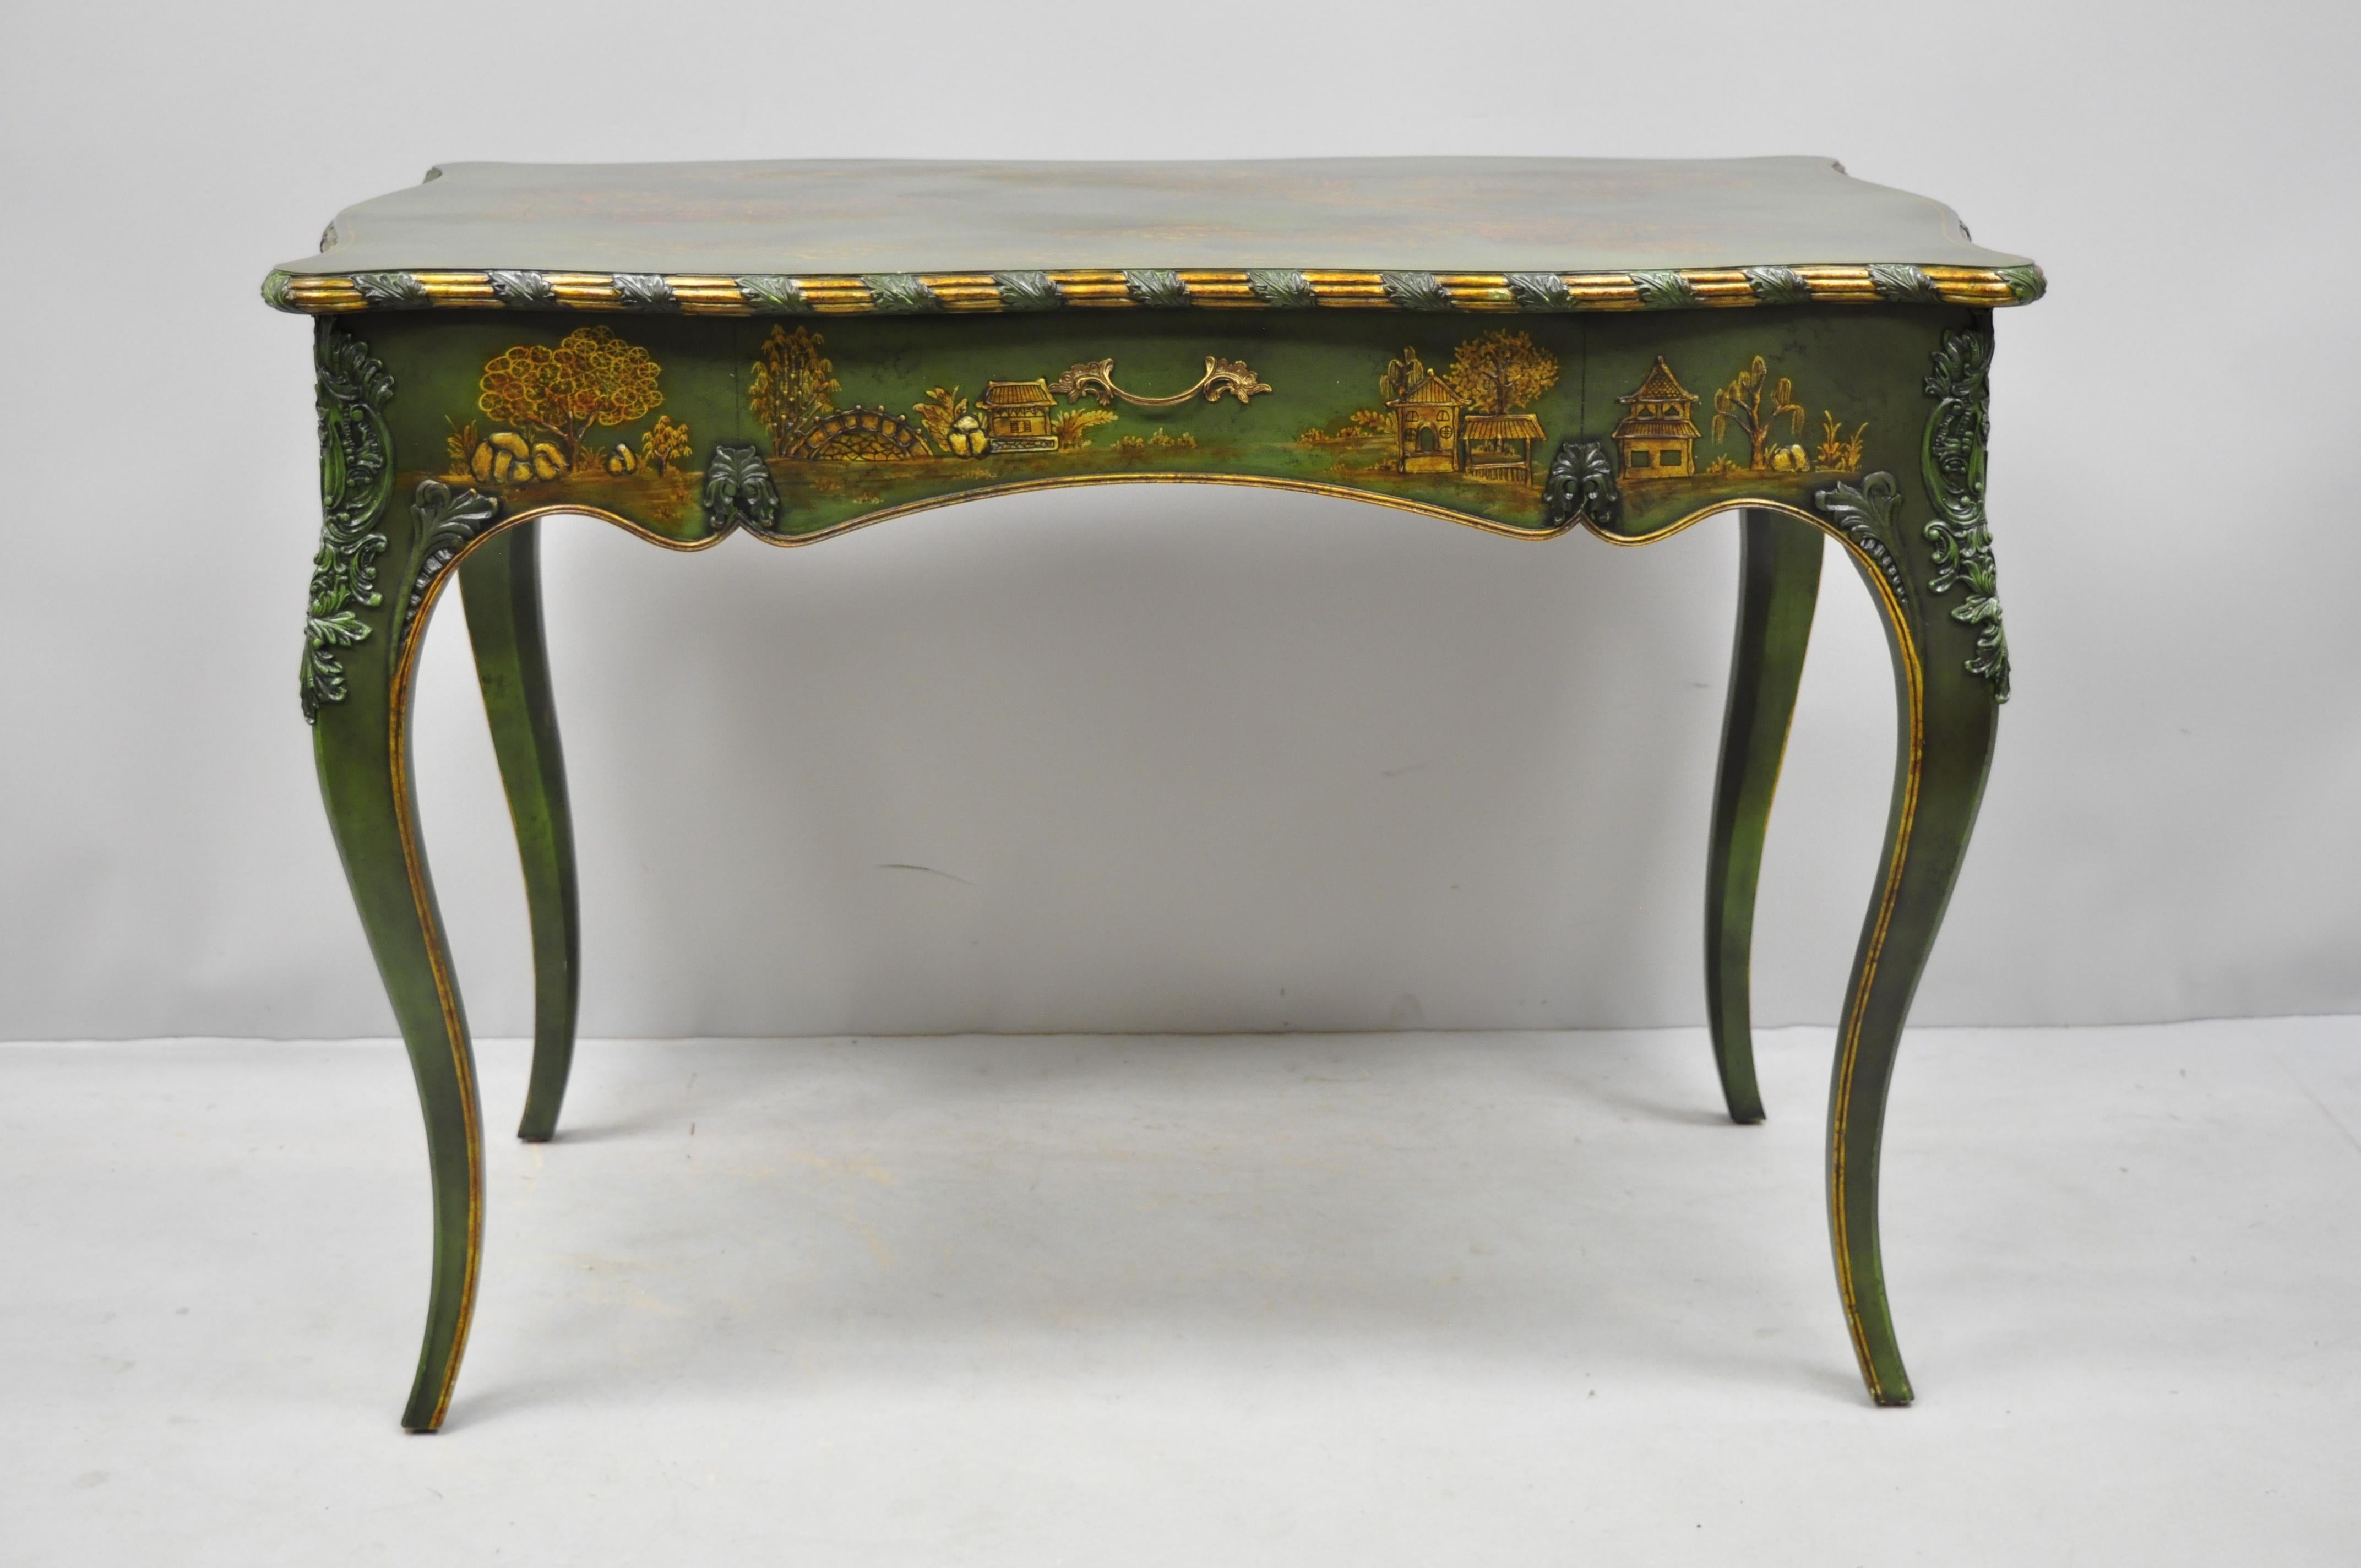 Maitland-Smith green hand painted Chinoiserie French Louis XV style desk. Item features green and gold hand painted scenes on all sides, finished back with rear false drawer, original label, cabriole legs, quality craftsmanship, great style and